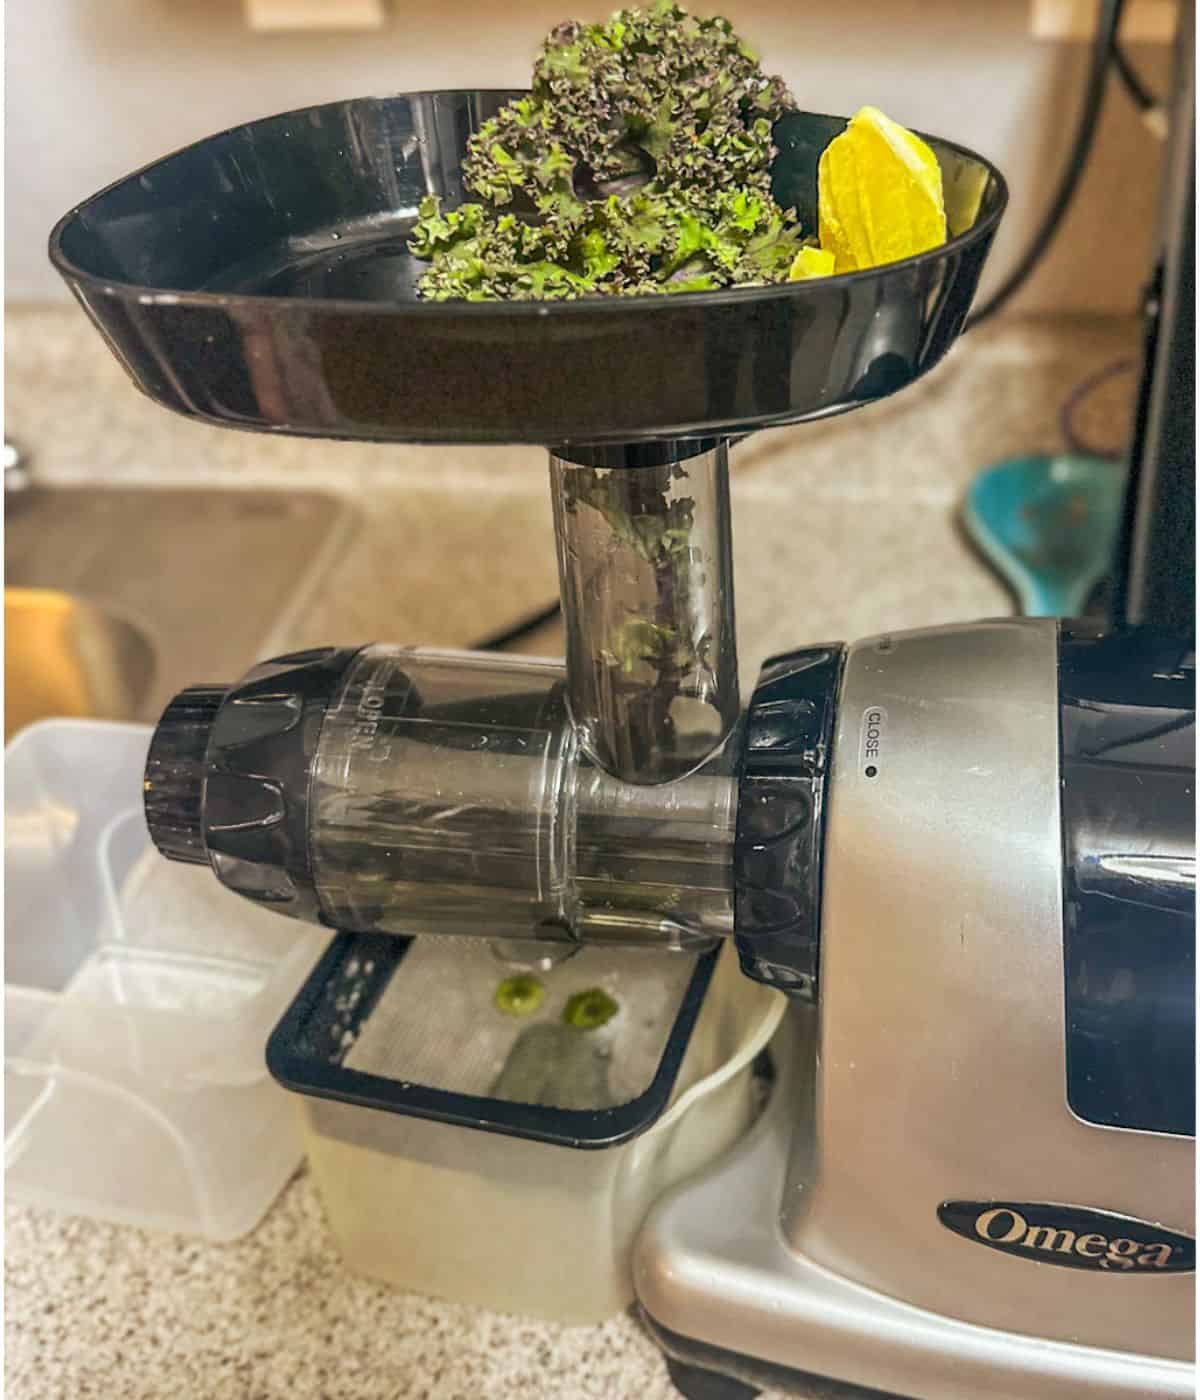 A photo of a silver and black omega juicer with kale being fed through the tube and lemon slices waiting next to it.